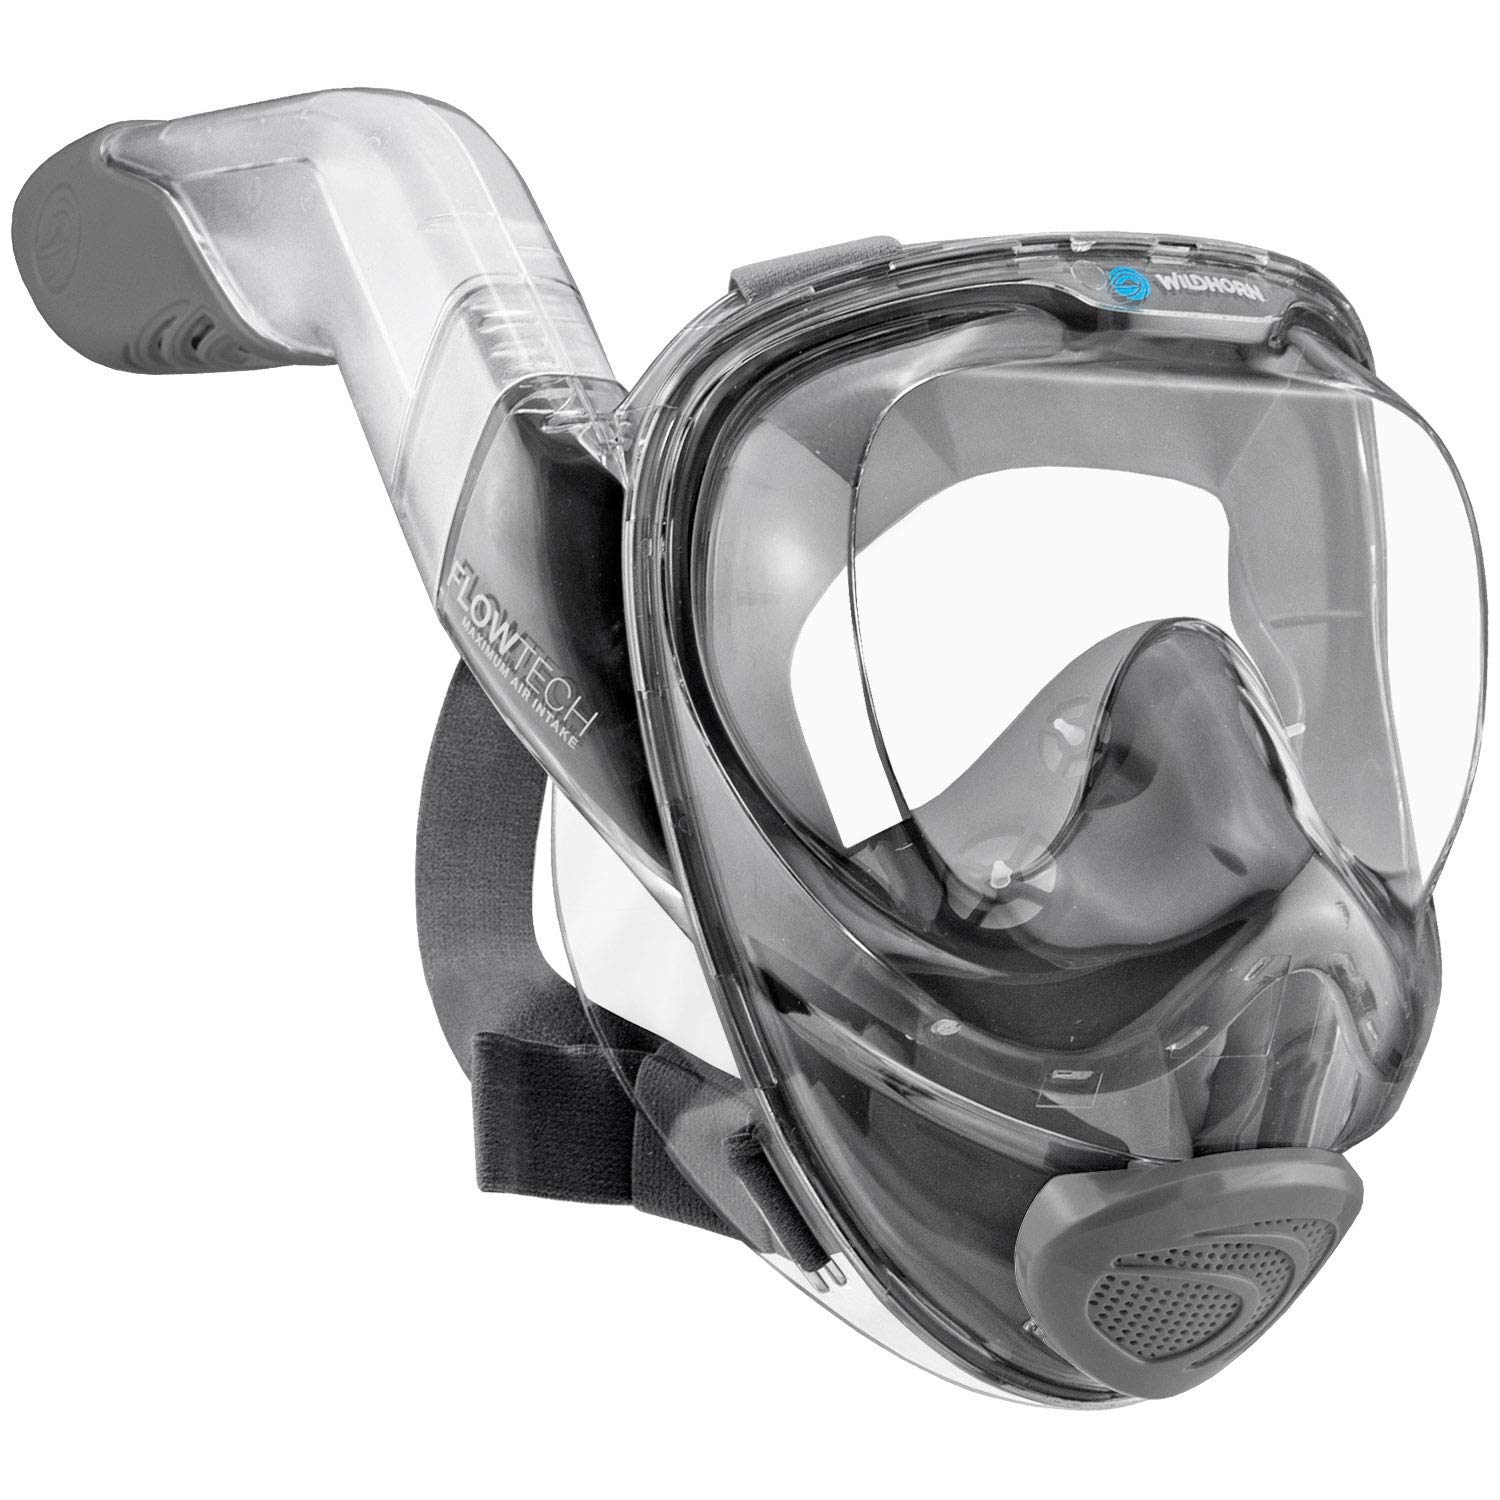 WildHorn Outfitters Seaview 180° V2 Full Face Snorkel Mask with FLOWTECH Advanced Breathing System - Sport - buy epic deals